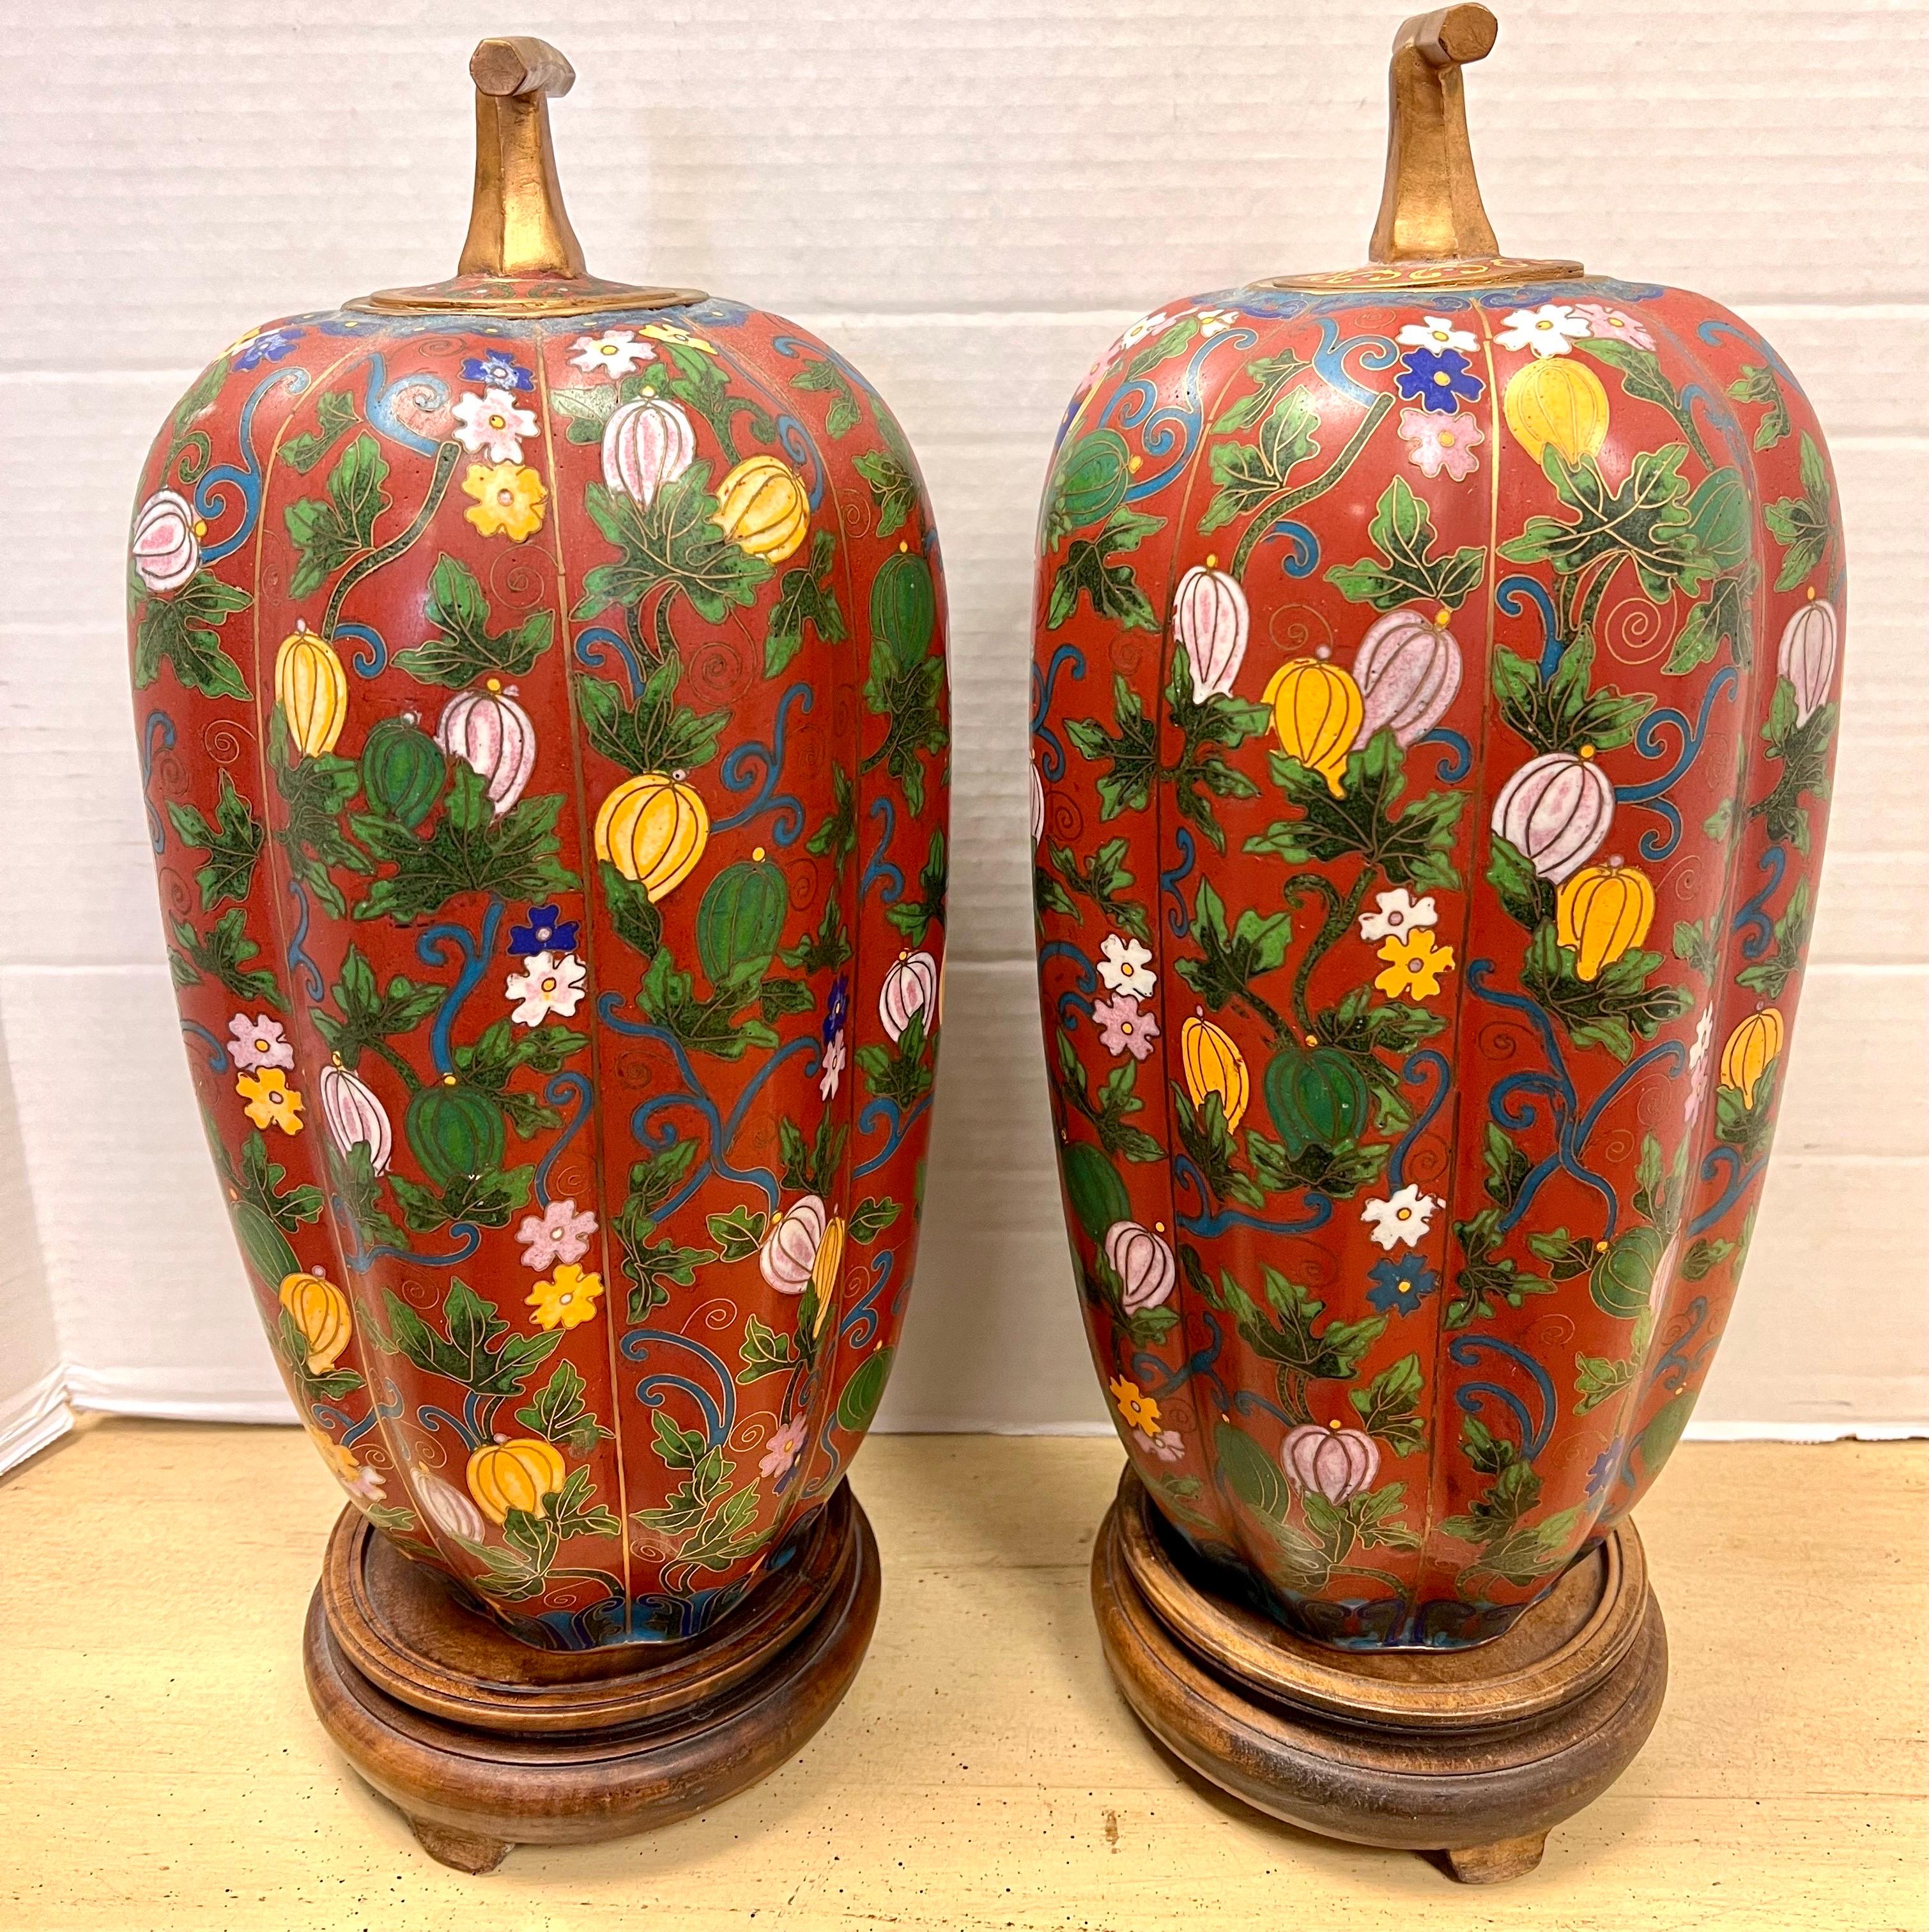 20th Century Pair of Chinese Red and Bronze Cloisonne Gourd Covered Urns Jars